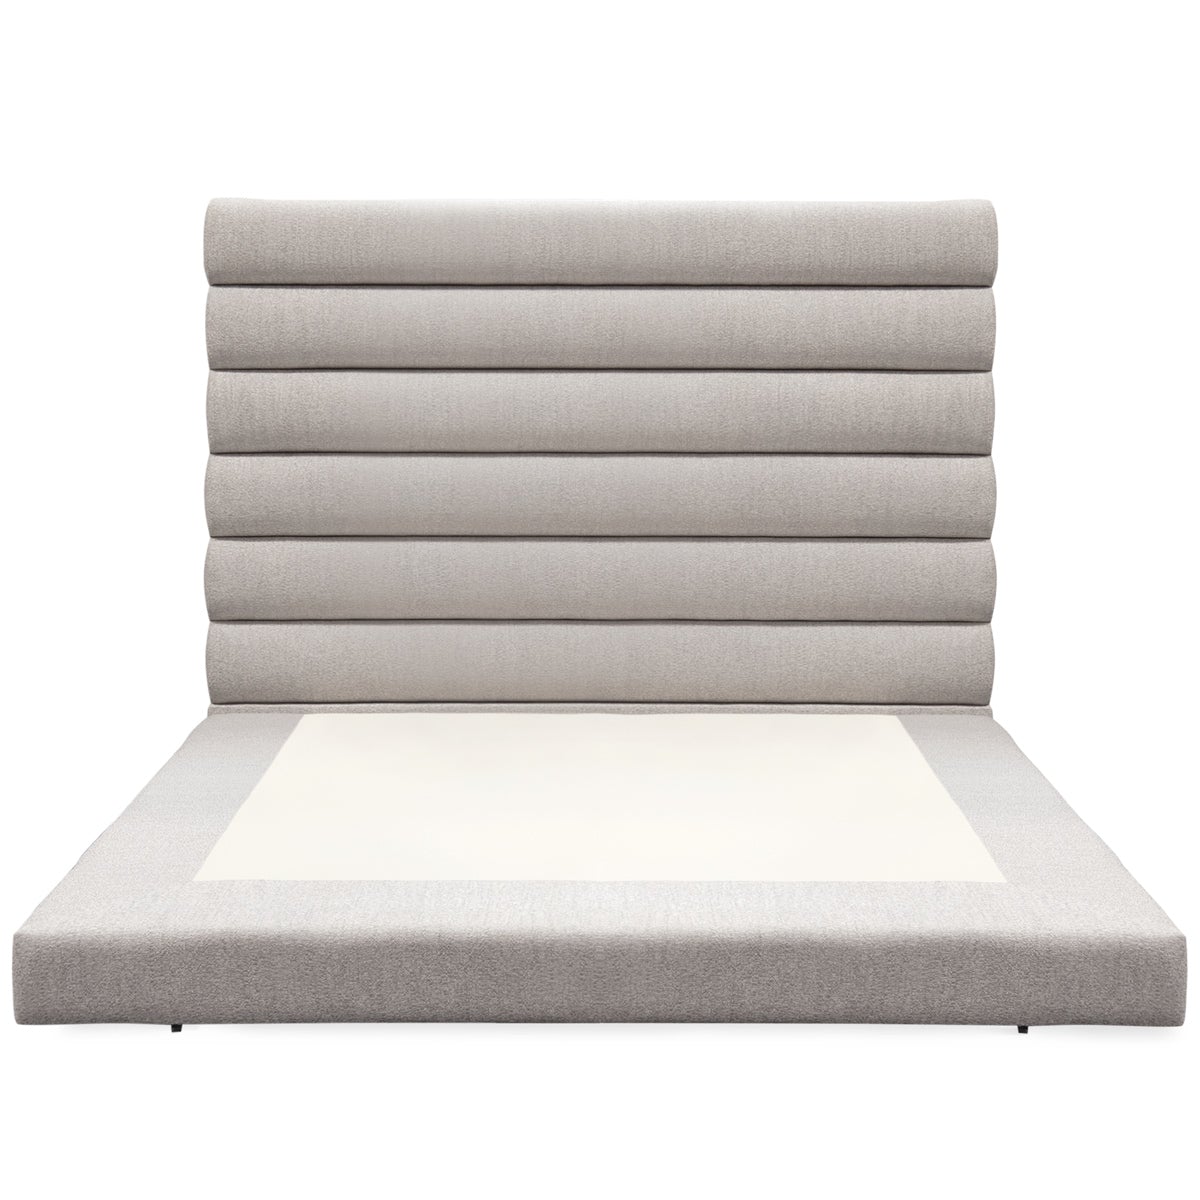 Milan Bed in Textured Fabric